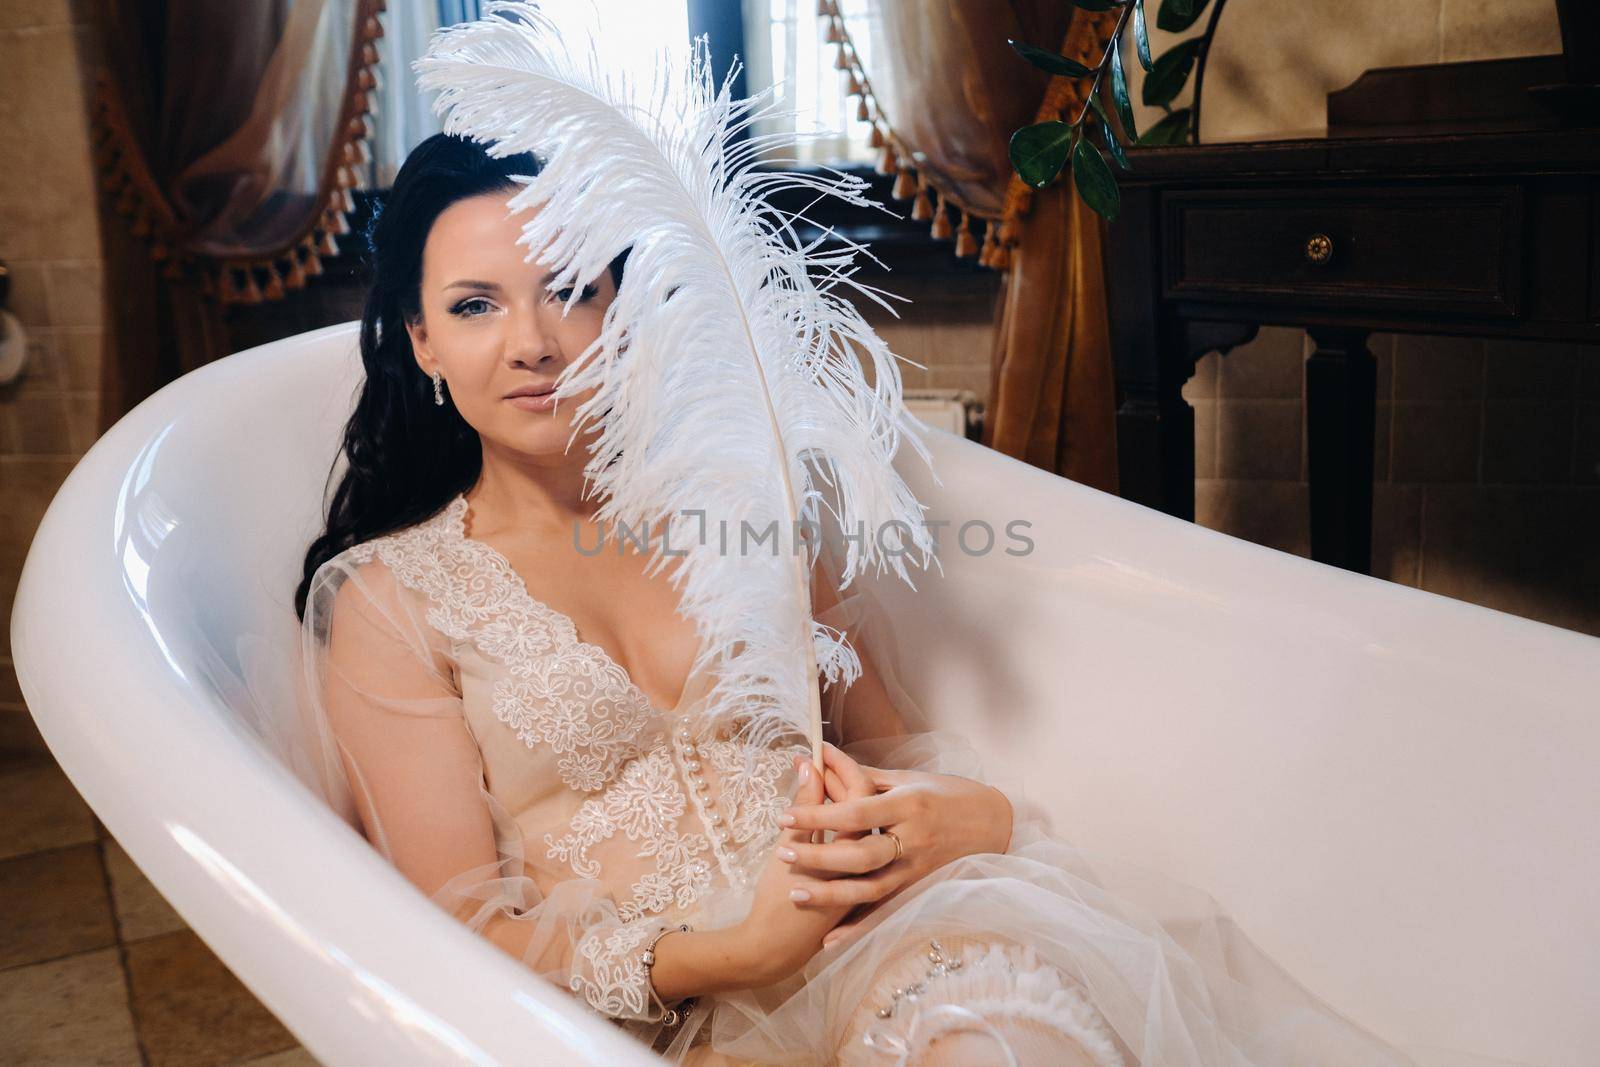 the bride, dressed in a boudoir transparent dress and underwear, lies in a vintage bathroom with a white feather in her hands, The morning of the bride.